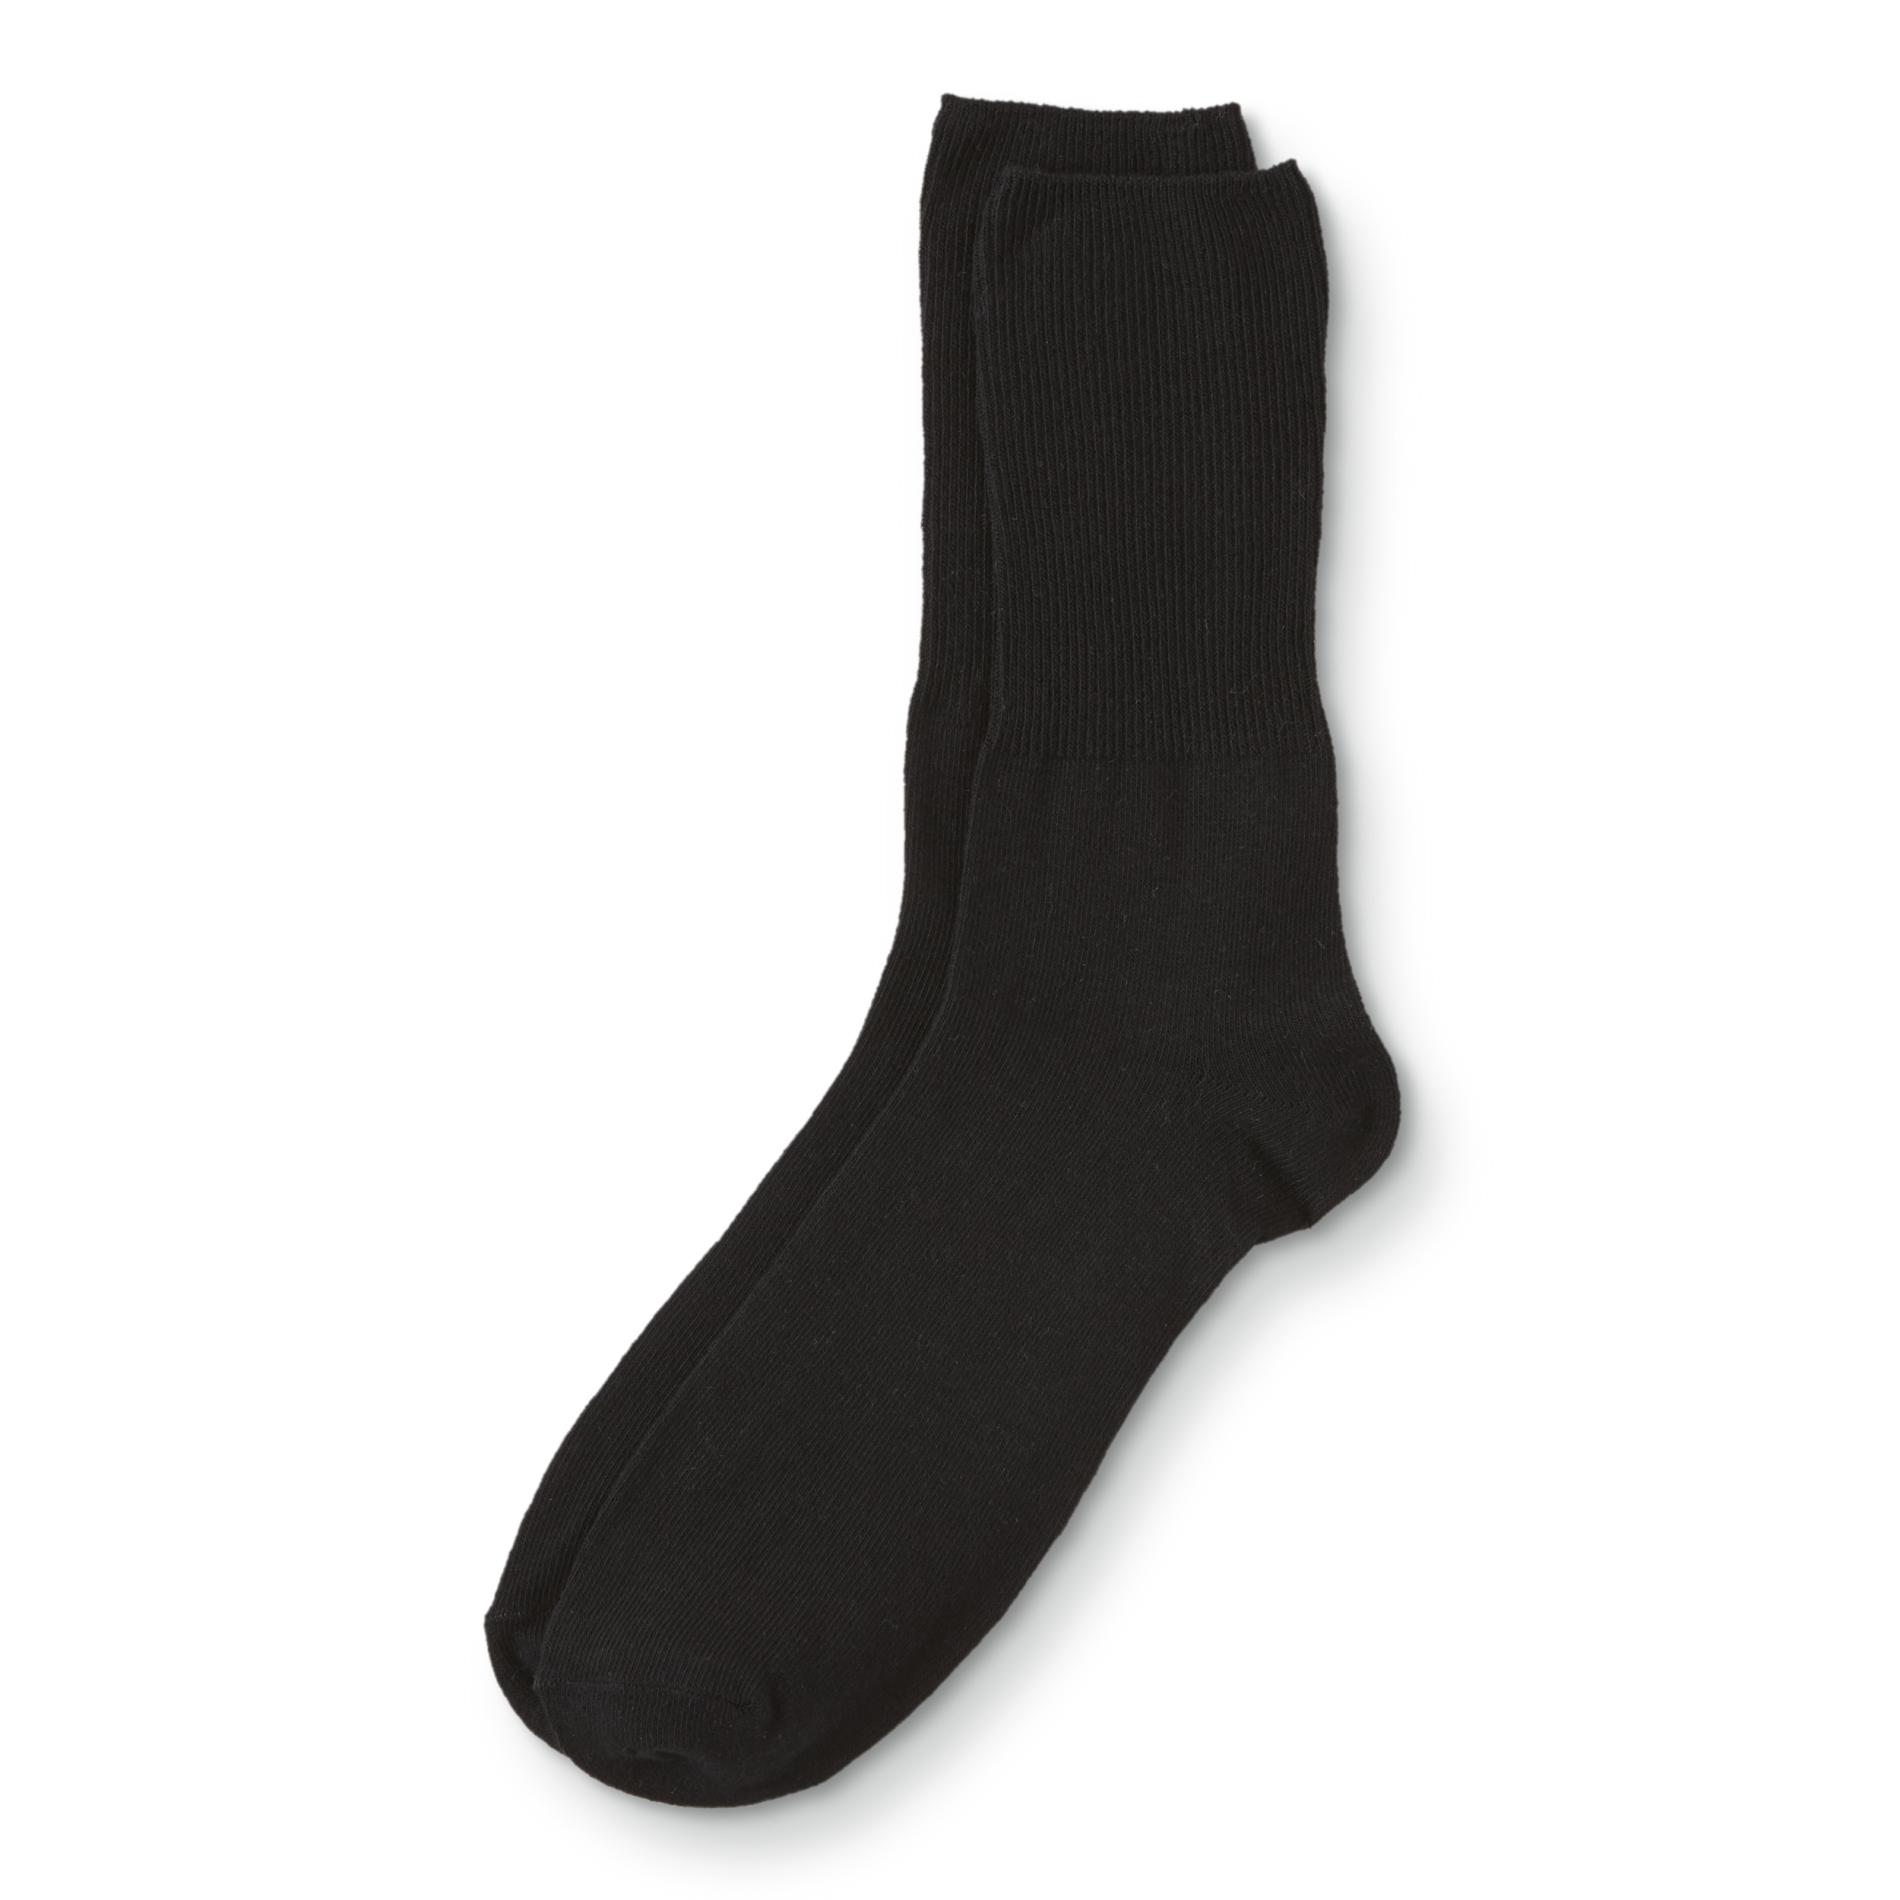 Basic Editions Women's 2-Pairs Crew Socks - Extended Size